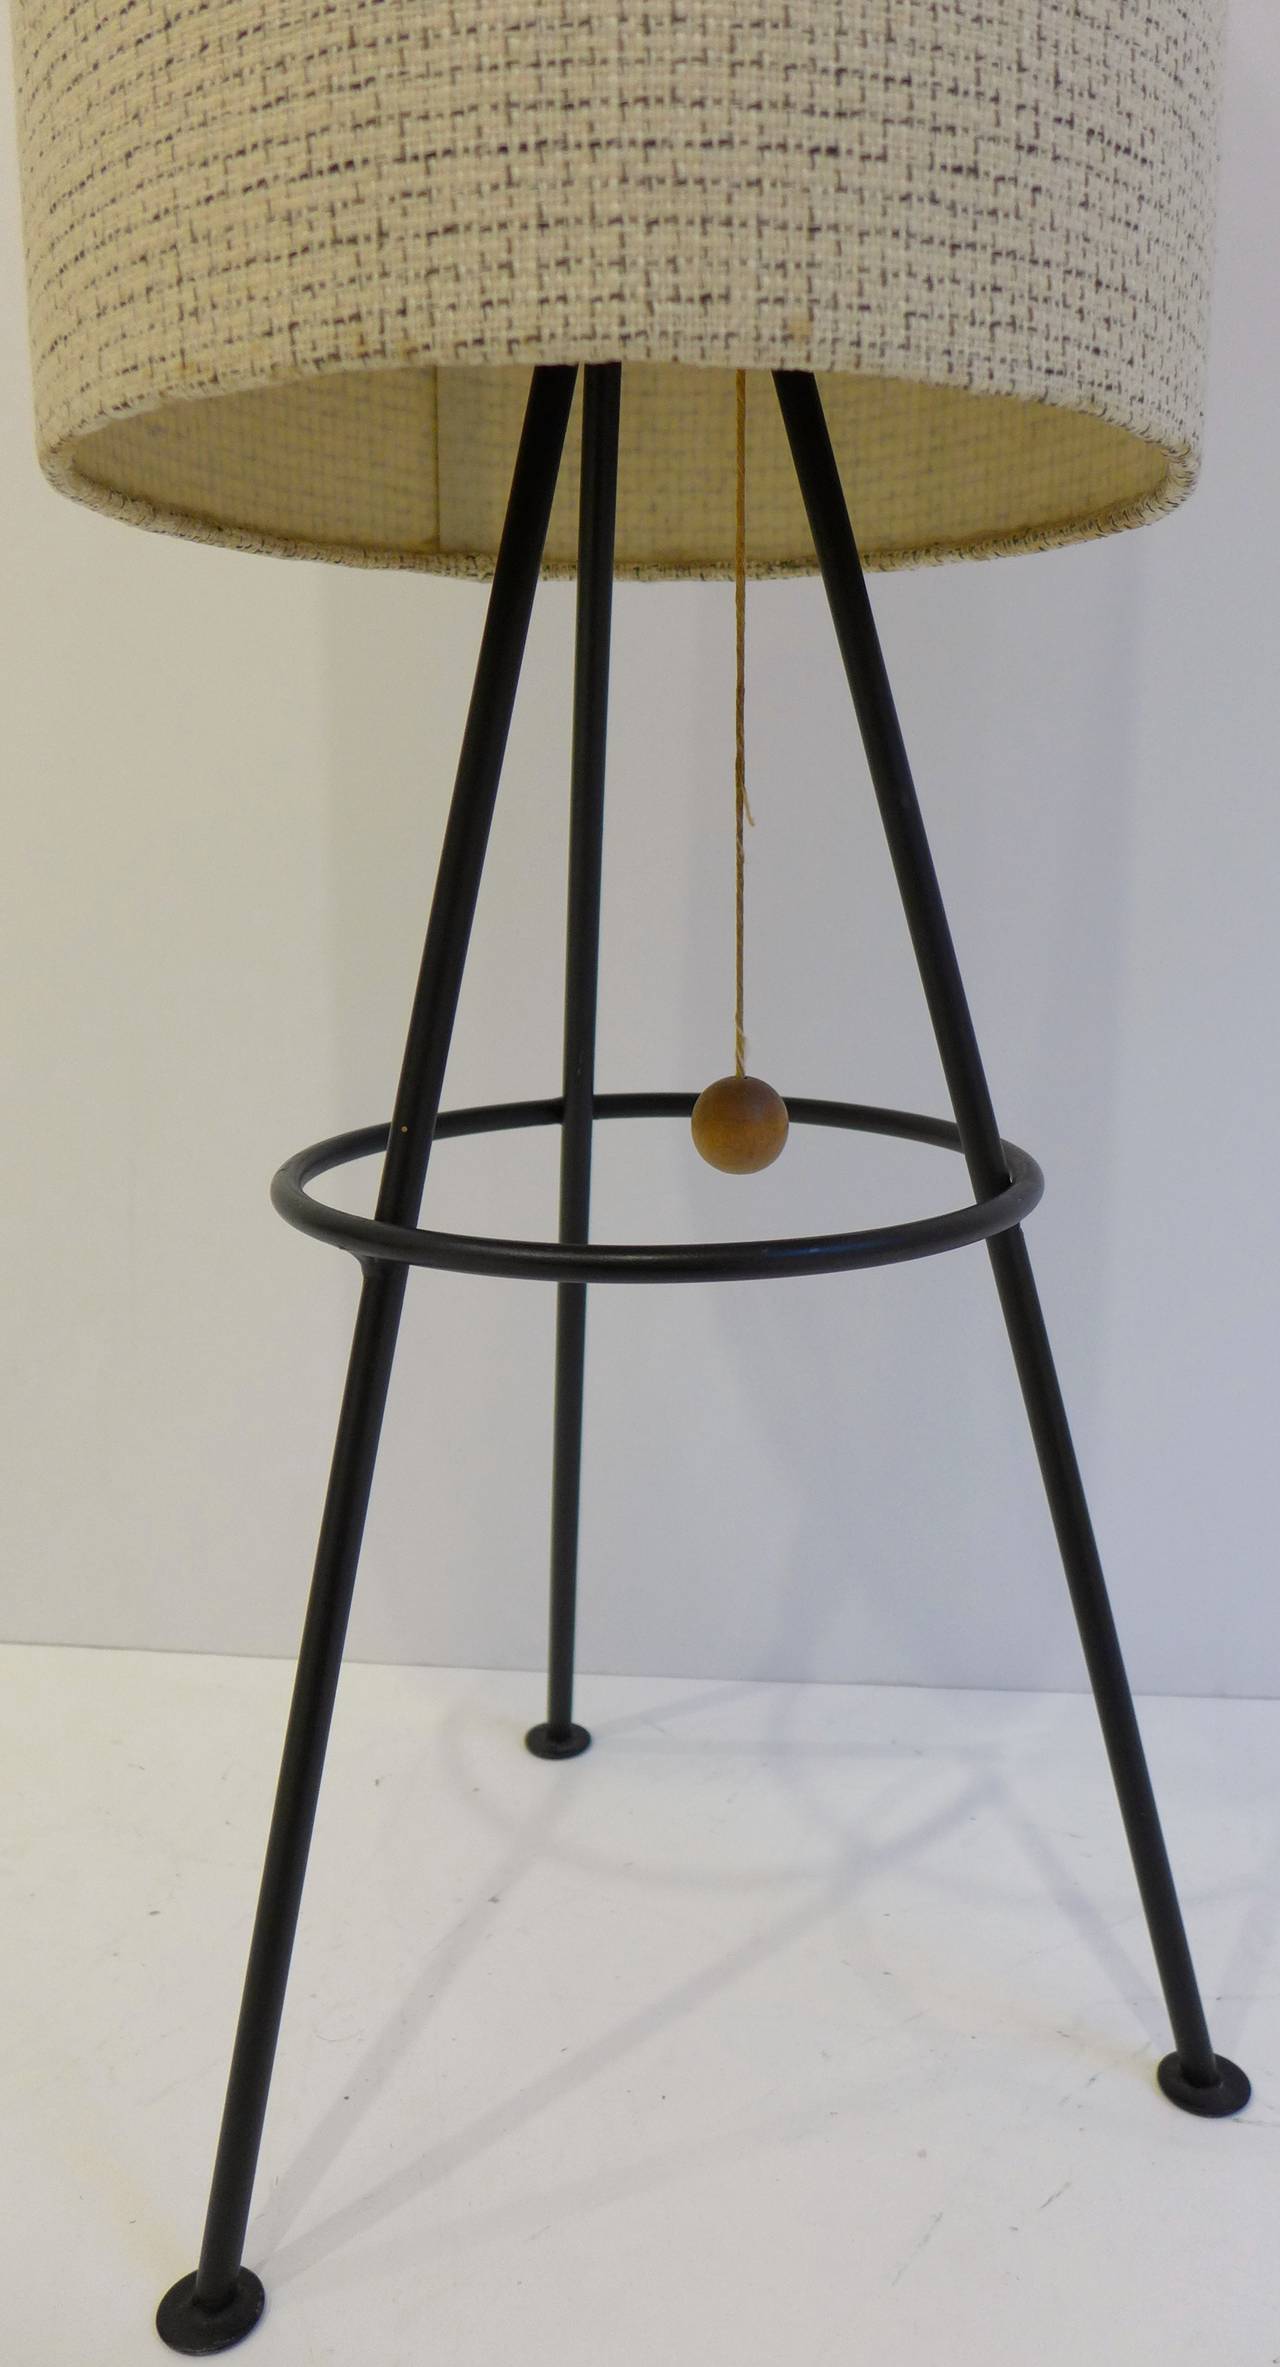 Rare table lamp of extruded metal with vintage woven shade and birch ball pull, produced c. 1952. Called a tripod lantern in the Lam Workshop catalog, it is a low-production design from an MIT-trained architect and designer who operated his own